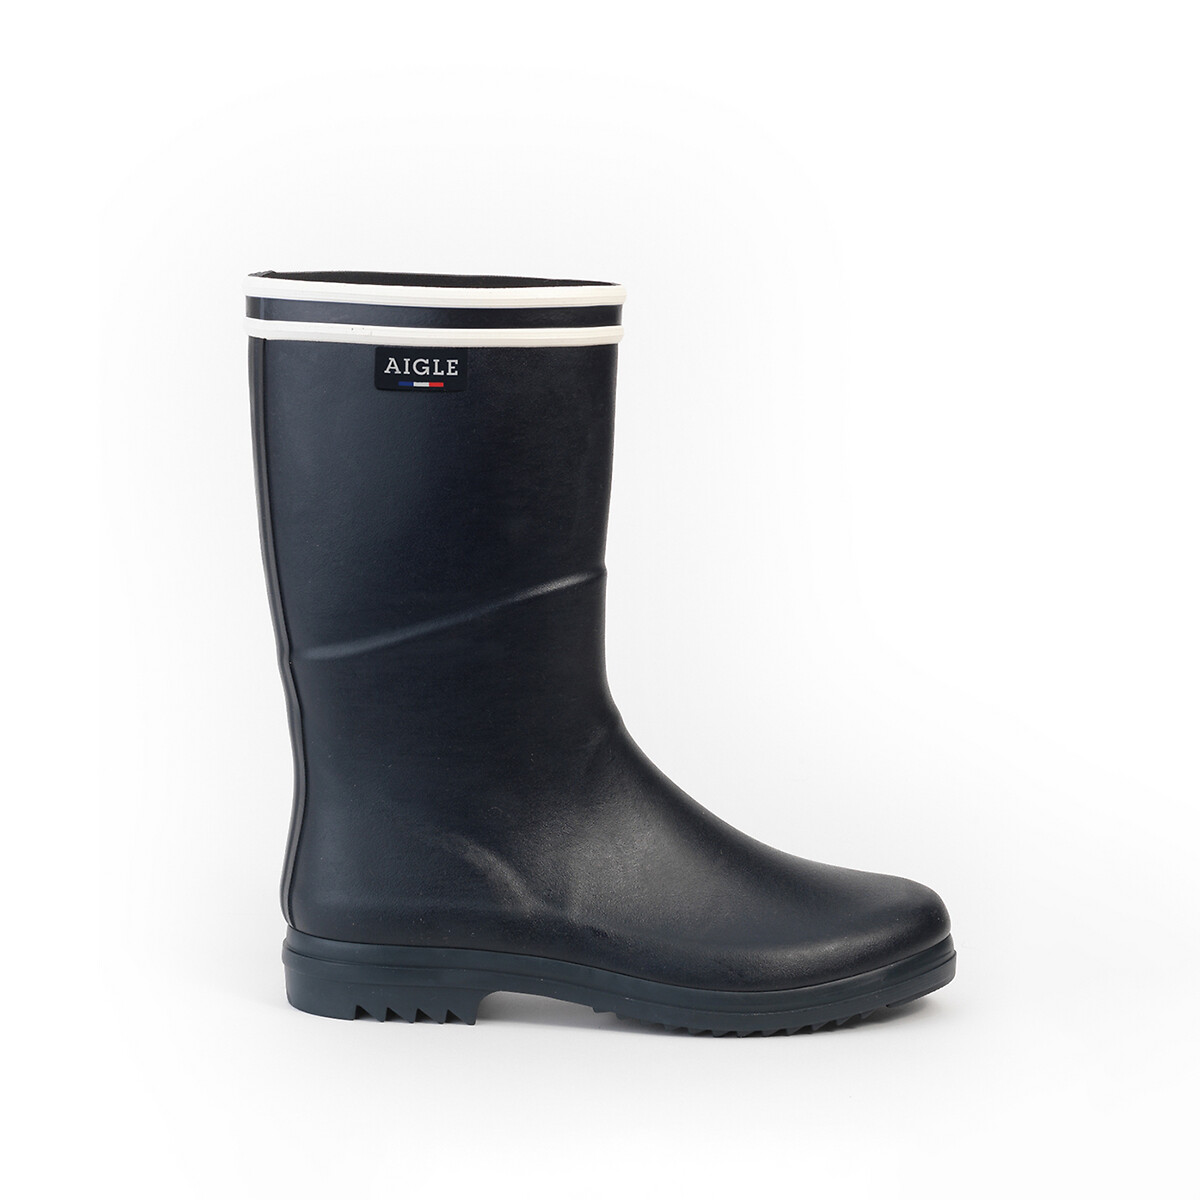 Chanteboot Stripes Wellies, Made in France